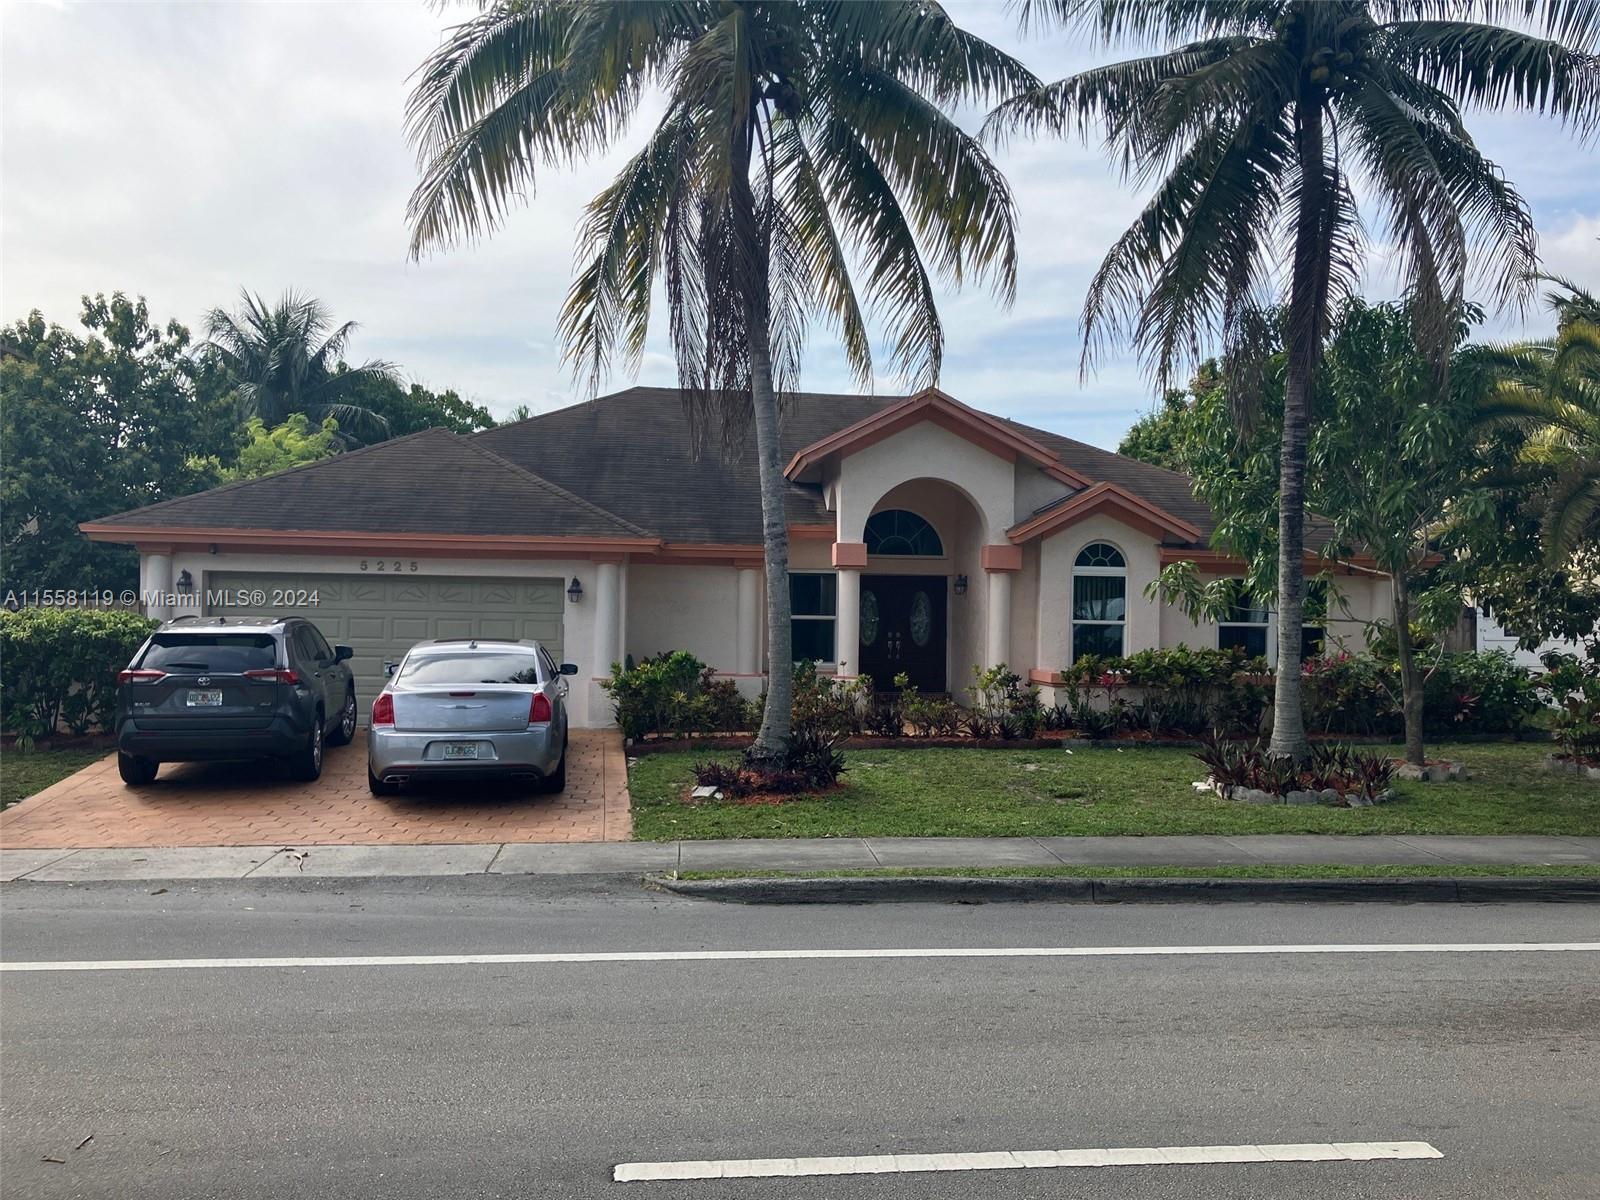 Photo of 5225 NW 70th Ave in Lauderhill, FL